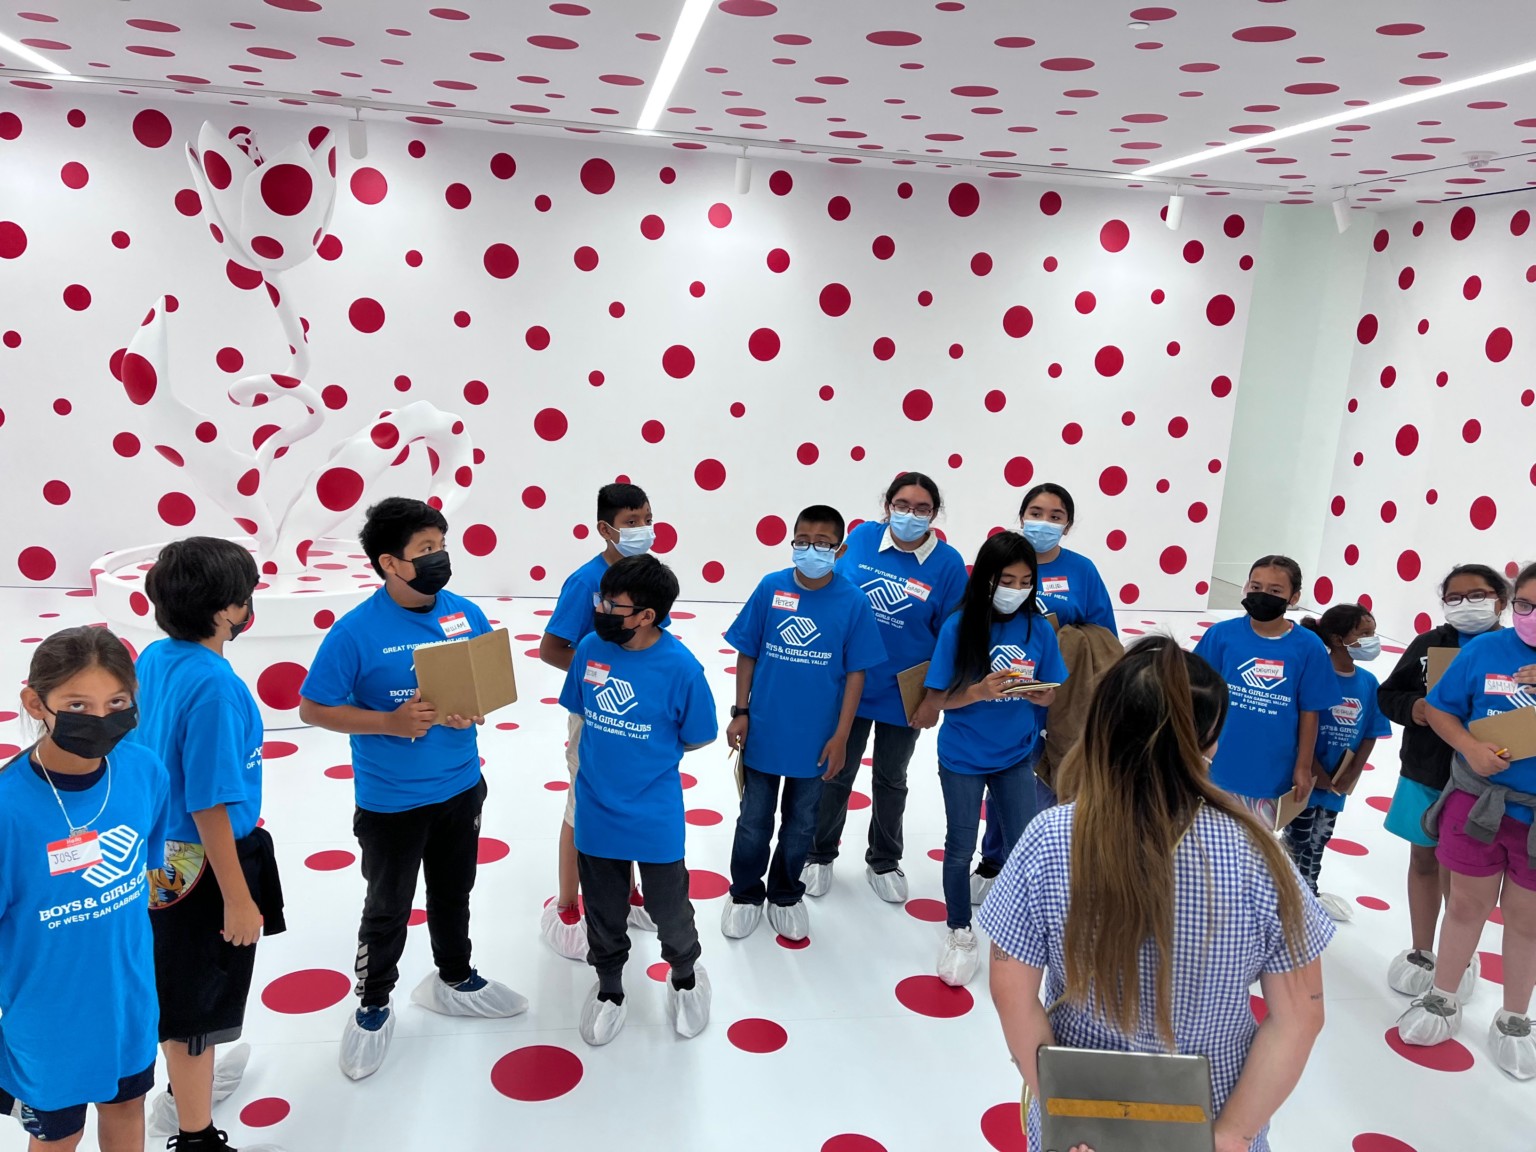 Students standing around inside a museum space with white walls and red polka dots all around